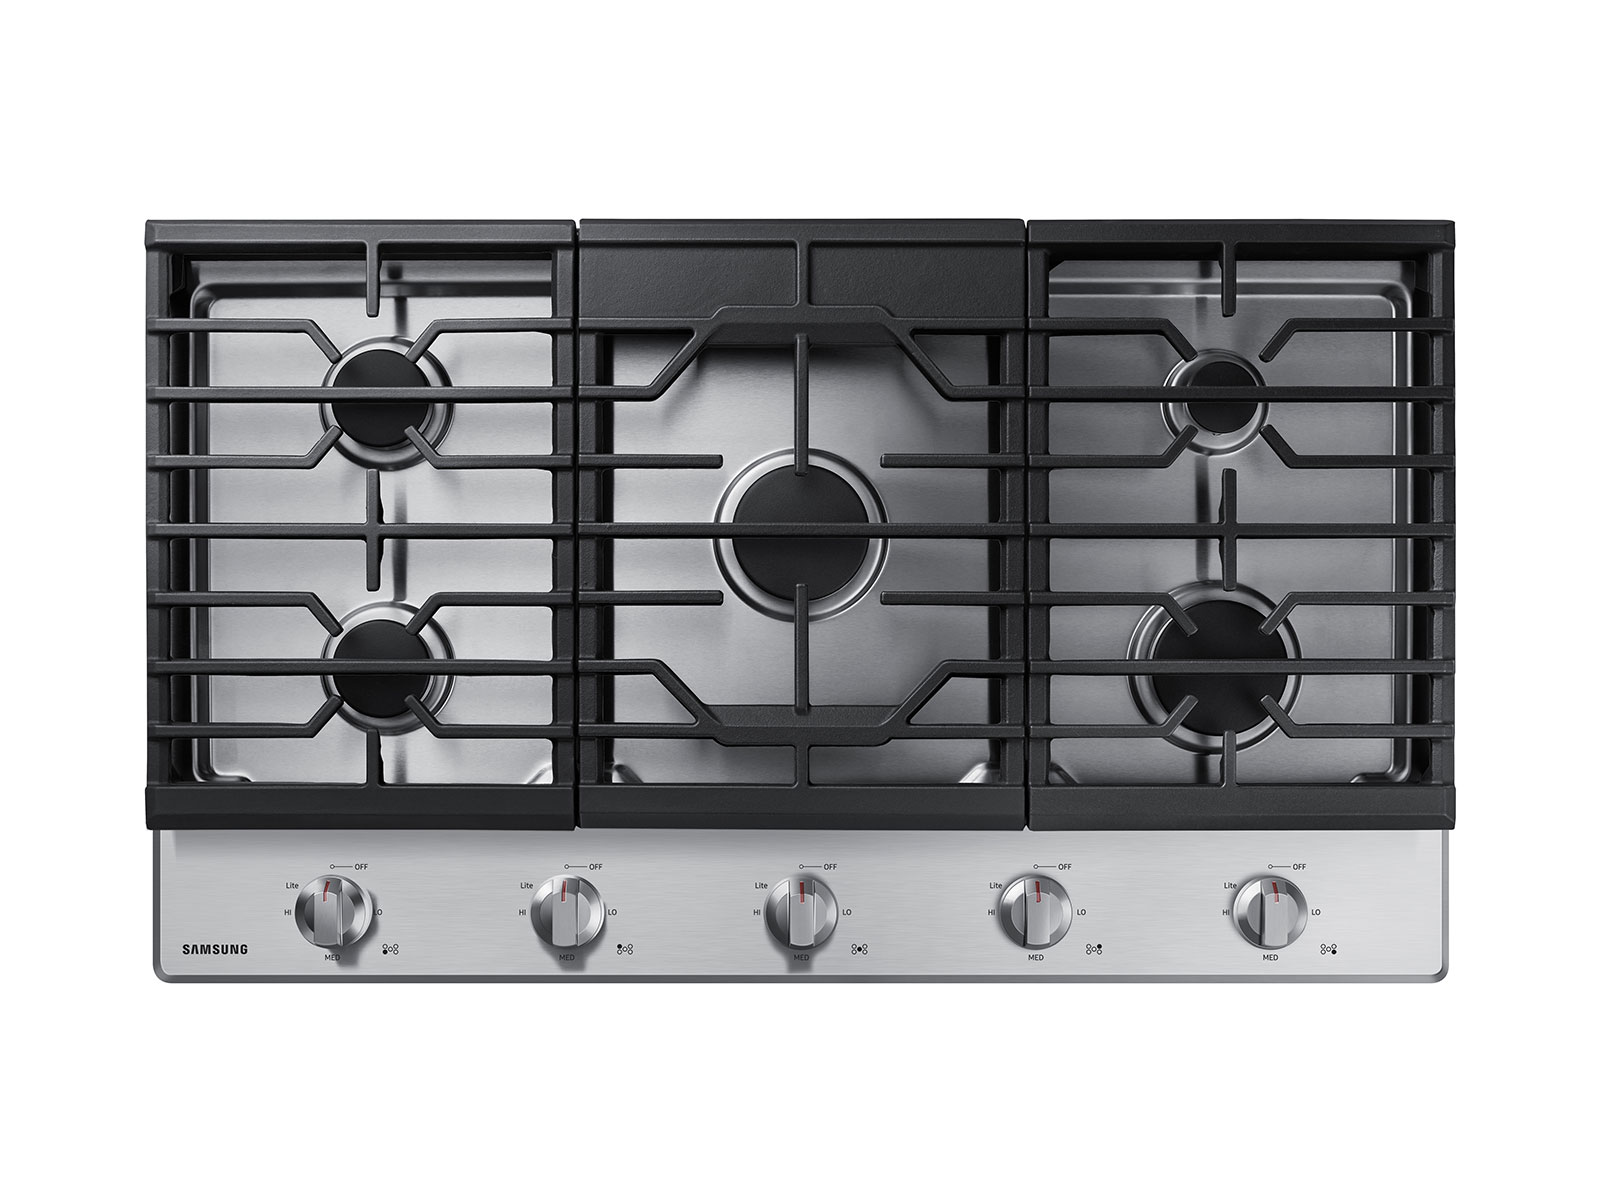 36 inch Gas Cooktop in Stainless Steel Cooktop - NA36R5310FS/AA